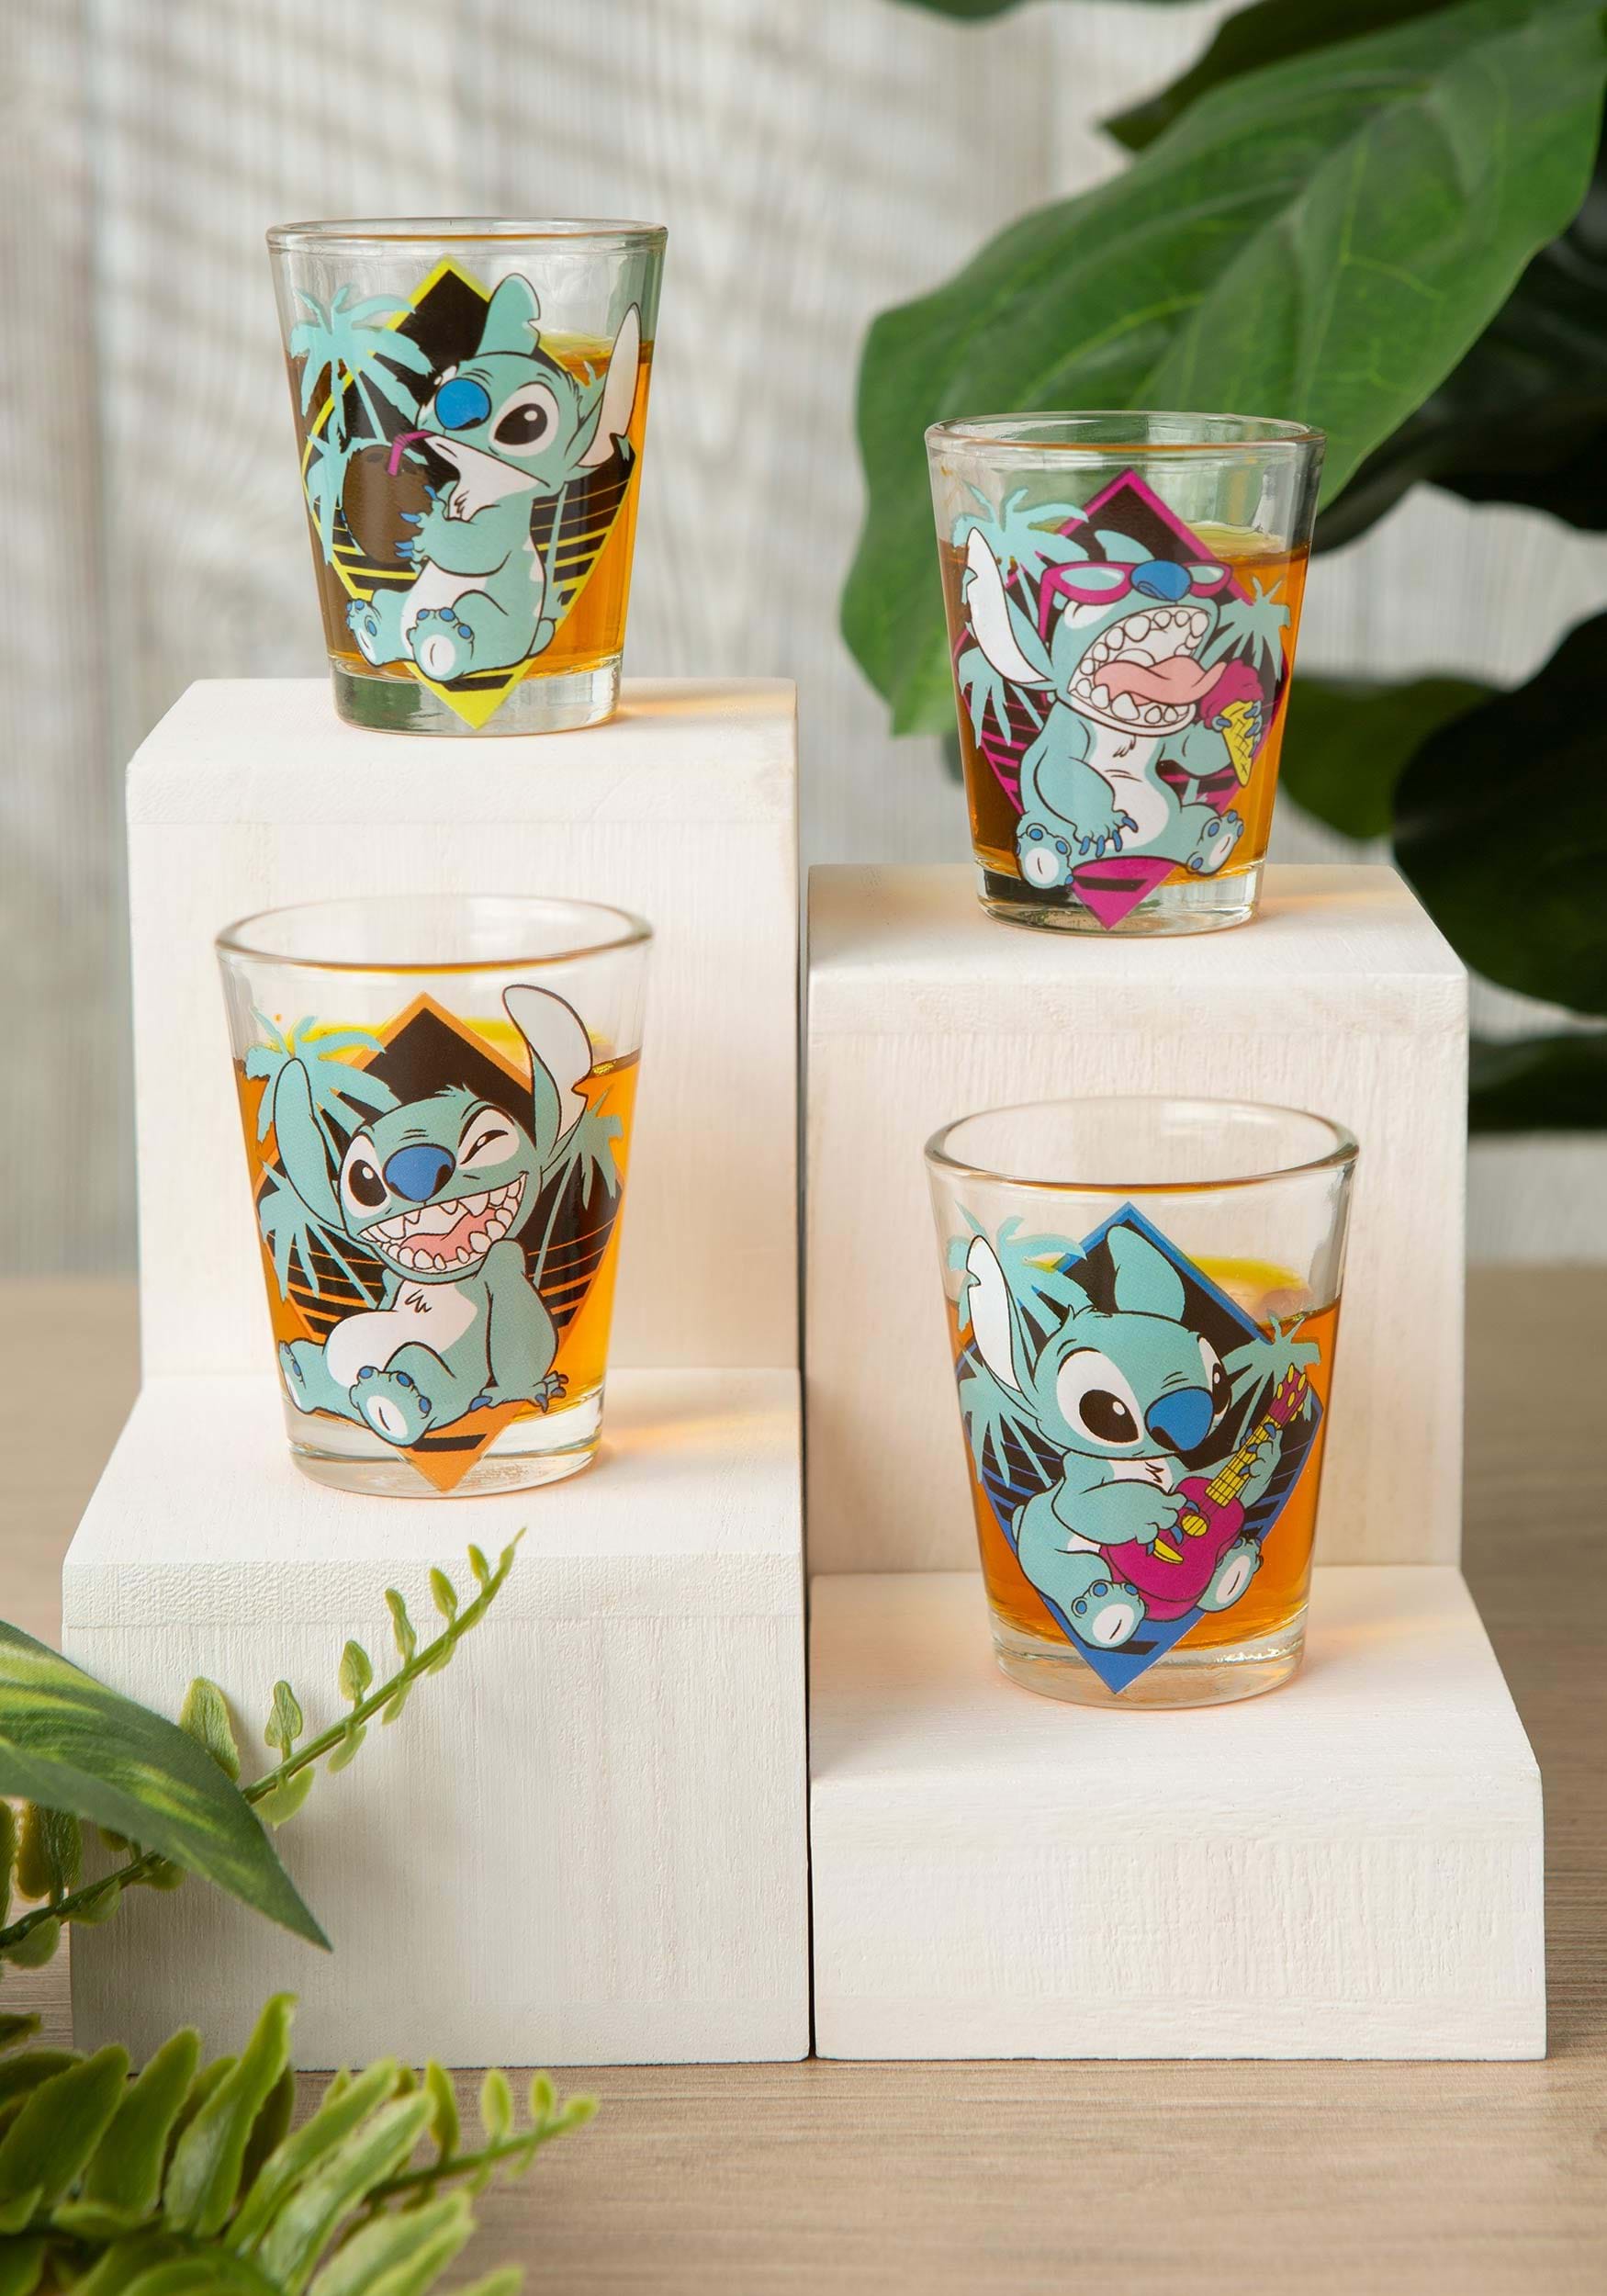 https://images.fun.com/products/60186/1-1/lilo-and-stitch-pastel-4pc-shot-glass-set-update.jpg